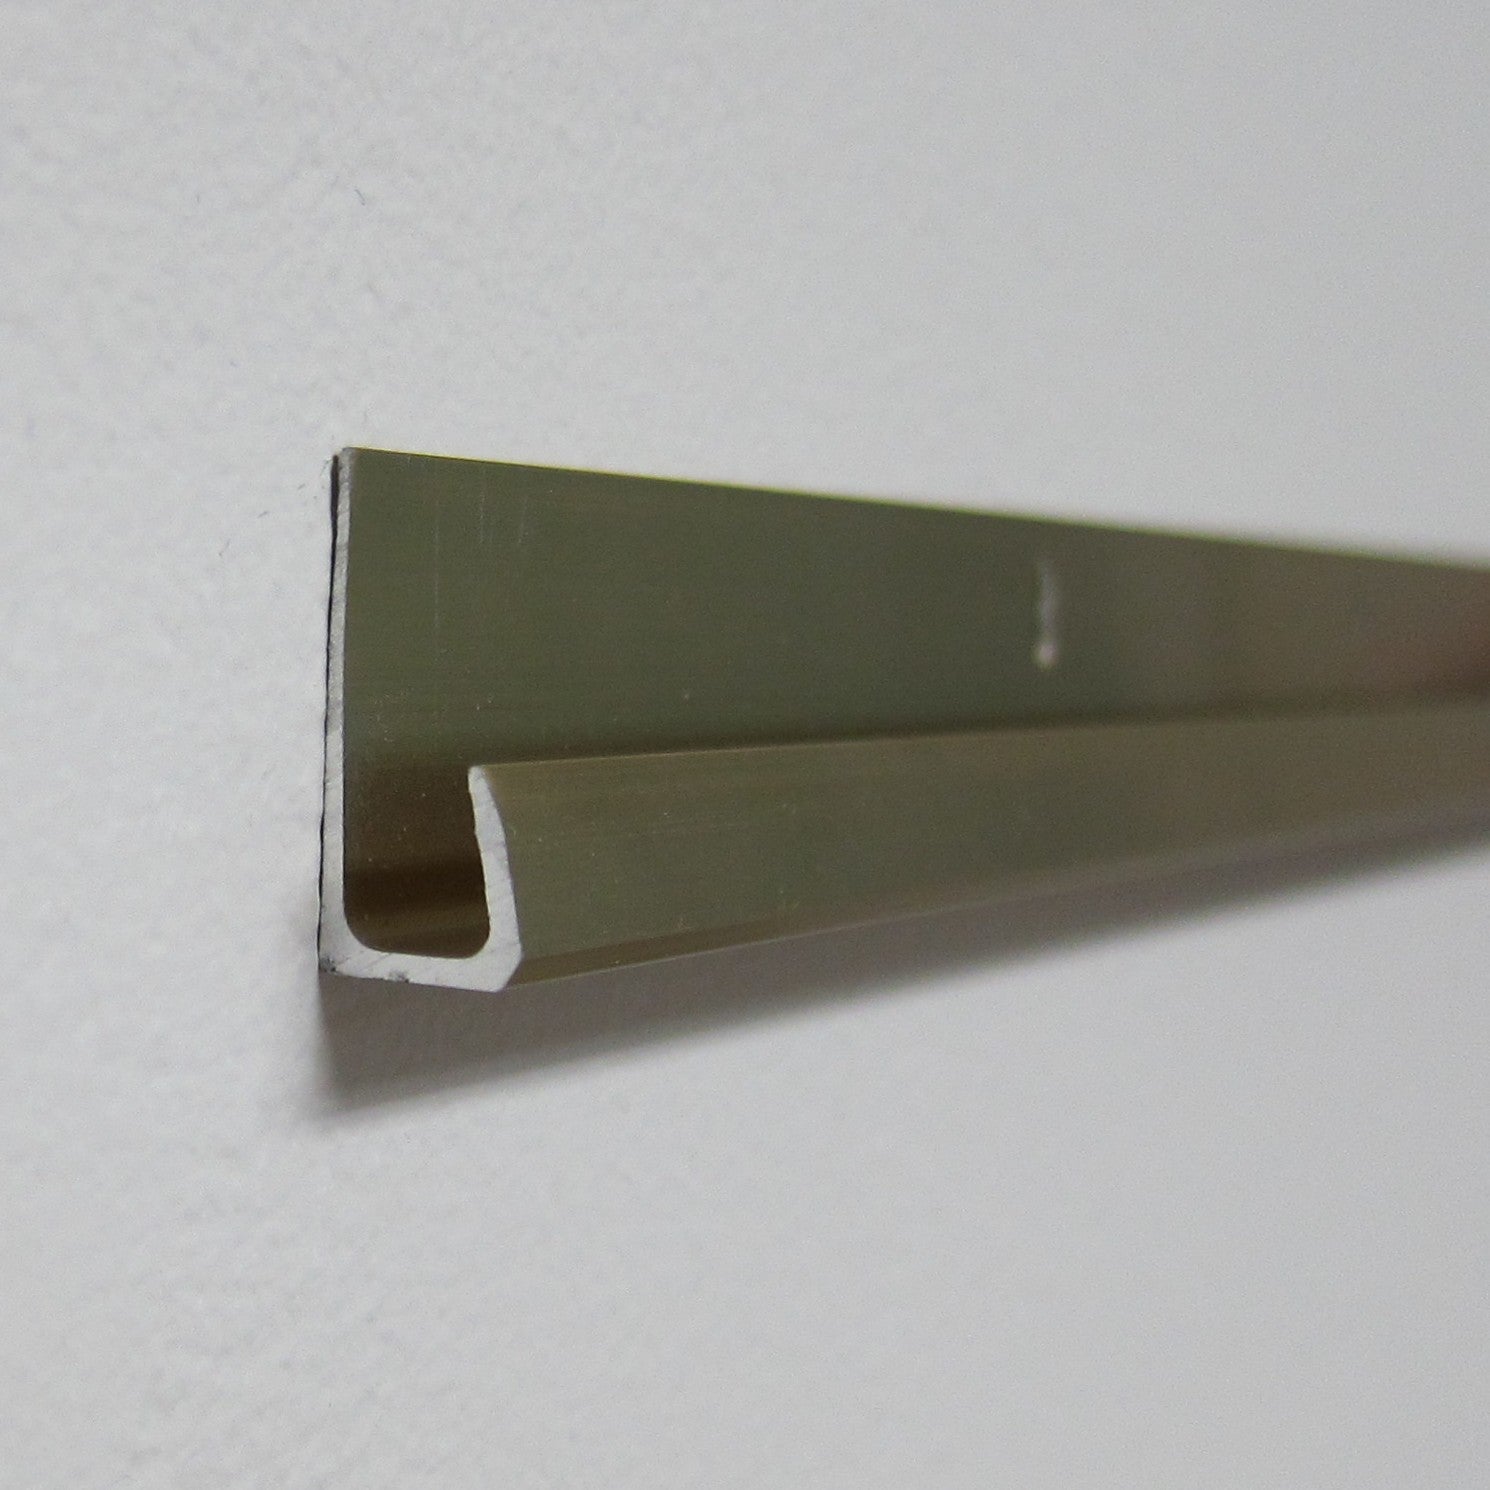 Gallery Wall Moulding 6 Foot J Channel - BGS-RAIL - Picture Hang Solutions